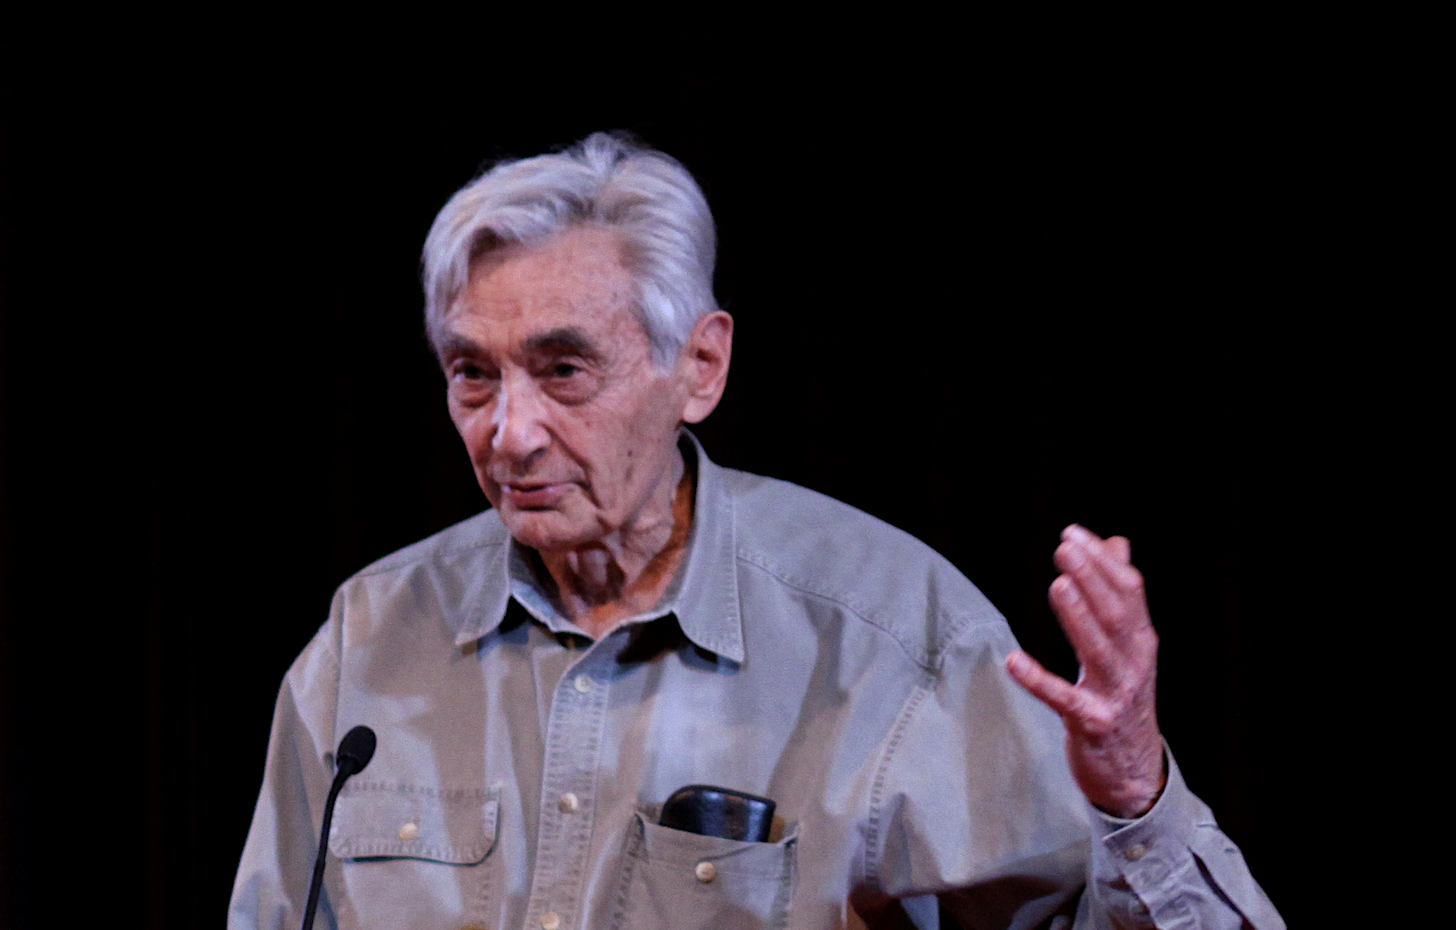 Howard Zinn’s Recommended Reading List for Activists Who Want to Change the World